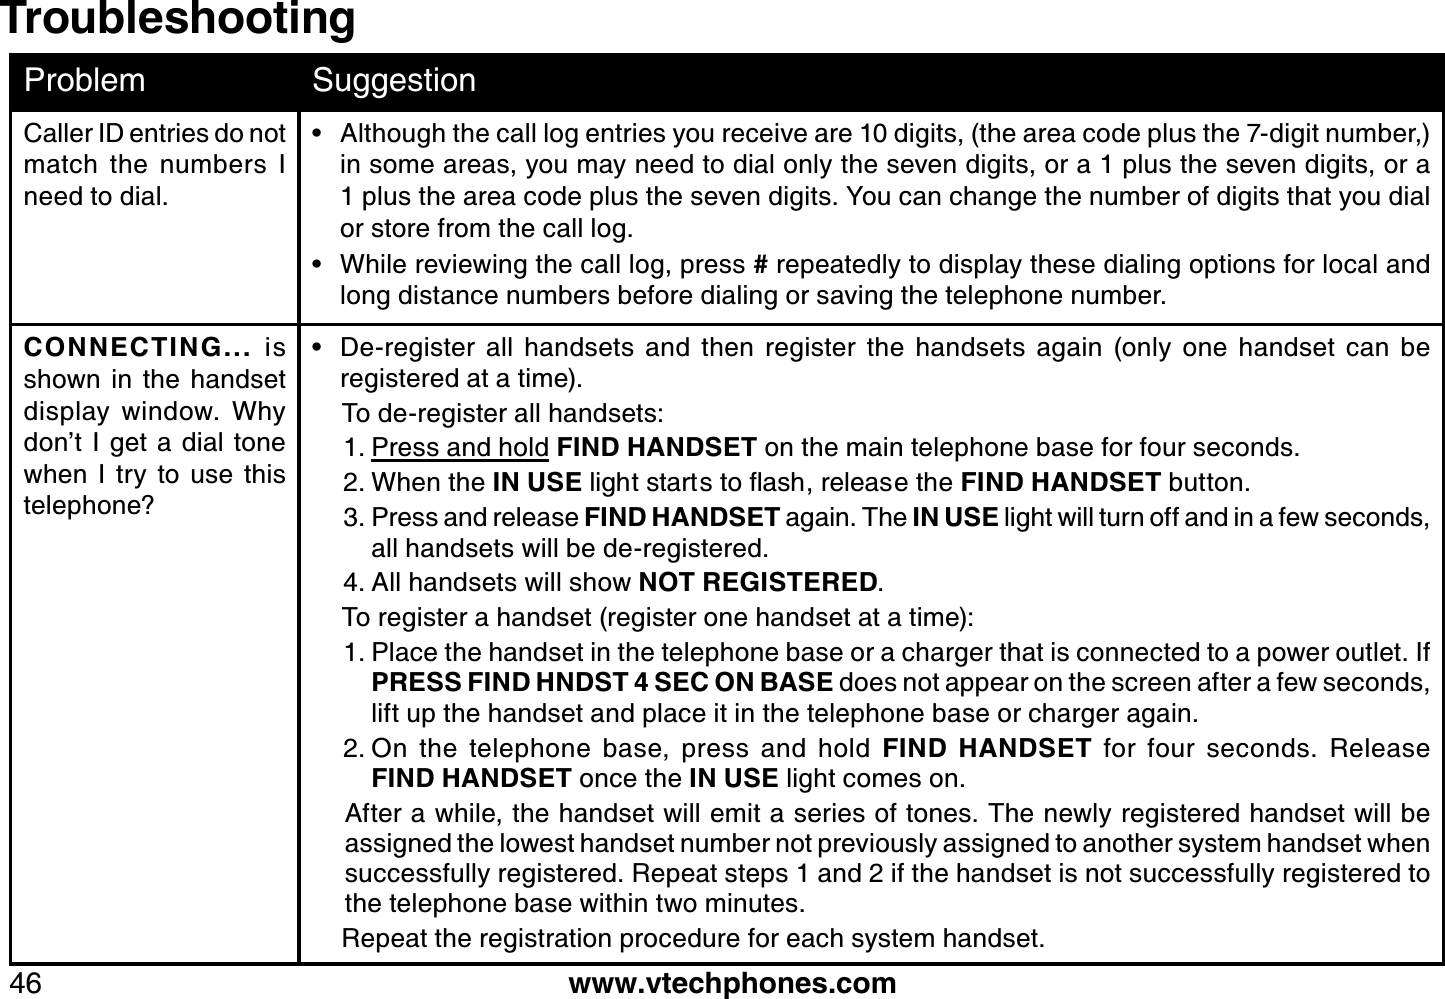 www.vtechphones.com46TroubleshootingProblem SuggestionCaller ID entries do not match  the  numbers  I need to dial.Although the call log entries you receive are 10 digits, (the area code plus the 7-digit number,)  in some areas, you may need to dial only the seven digits, or a 1 plus the seven digits, or a 1 plus the area code plus the seven digits. You can change the number of digits that you dial or store from the call log.   While reviewing the call log, press # repeatedly to display these dialing options for local and long distance numbers before dialing or saving the telephone number.  ••CONNECTING...  is shown  in  the  handset display  window.  Why don’t  I get a dial tone when  I  try  to  use  this telephone?De-register  all  handsets  and  then  register  the  handsets  again  (only  one  handset  can  be registered at a time).To de-register all handsets:Press and hold FIND HANDSET on the main telephone base for four seconds.When the IN USENKIJVUVCTVUVQƀCUJTGNGCUGVJGFIND HANDSET button.Press and release FIND HANDSET again. The IN USE light will turn off and in a few seconds, all handsets will be de-registered.All handsets will show NOT REGISTERED.To register a handset (register one handset at a time):Place the handset in the telephone base or a charger that is connected to a power outlet. If PRESS FIND HNDST 4 SEC ON BASE does not appear on the screen after a few seconds, lift up the handset and place it in the telephone base or charger again.On  the  telephone  base,  press  and  hold  FIND  HANDSET  for  four  seconds.  Release             FIND HANDSET once the IN USE light comes on.After a while, the handset will emit a series of tones. The newly registered handset will be assigned the lowest handset number not previously assigned to another system handset when successfully registered. Repeat steps 1 and 2 if the handset is not successfully registered to the telephone base within two minutes.    Repeat the registration procedure for each system handset.•1.2.3.4.1.2.